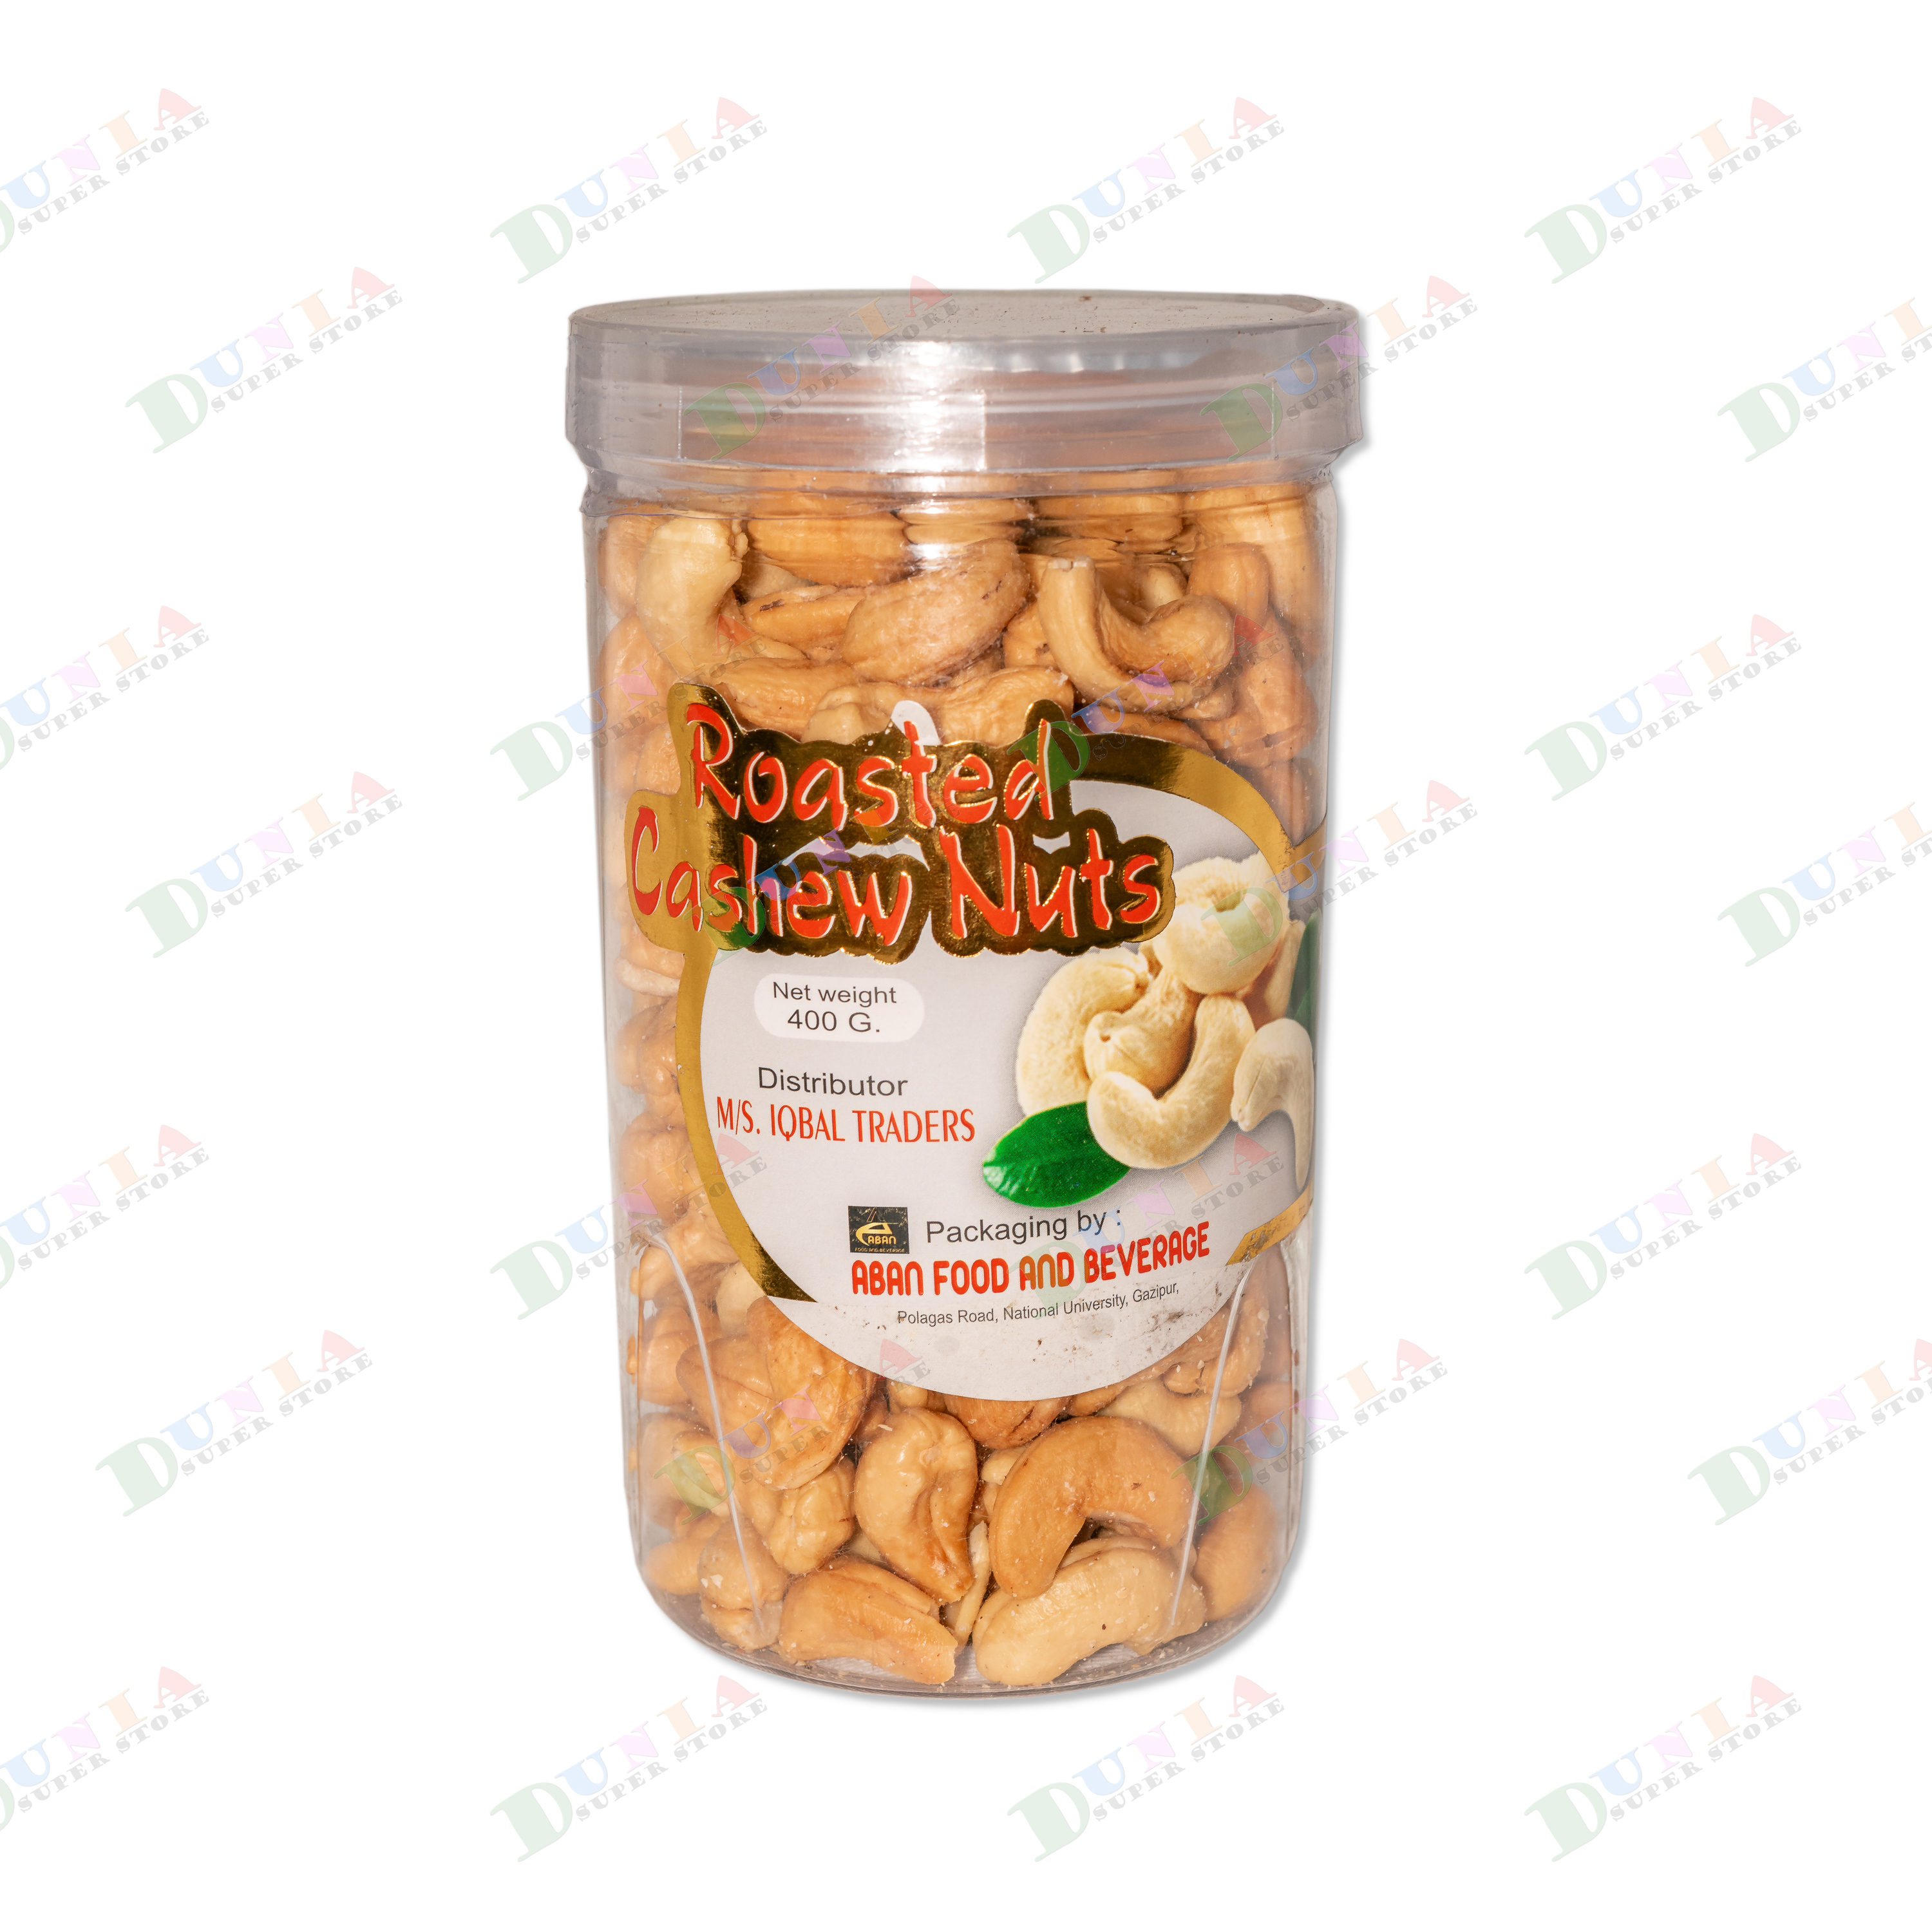 Roasted Cashew Nuts 400g